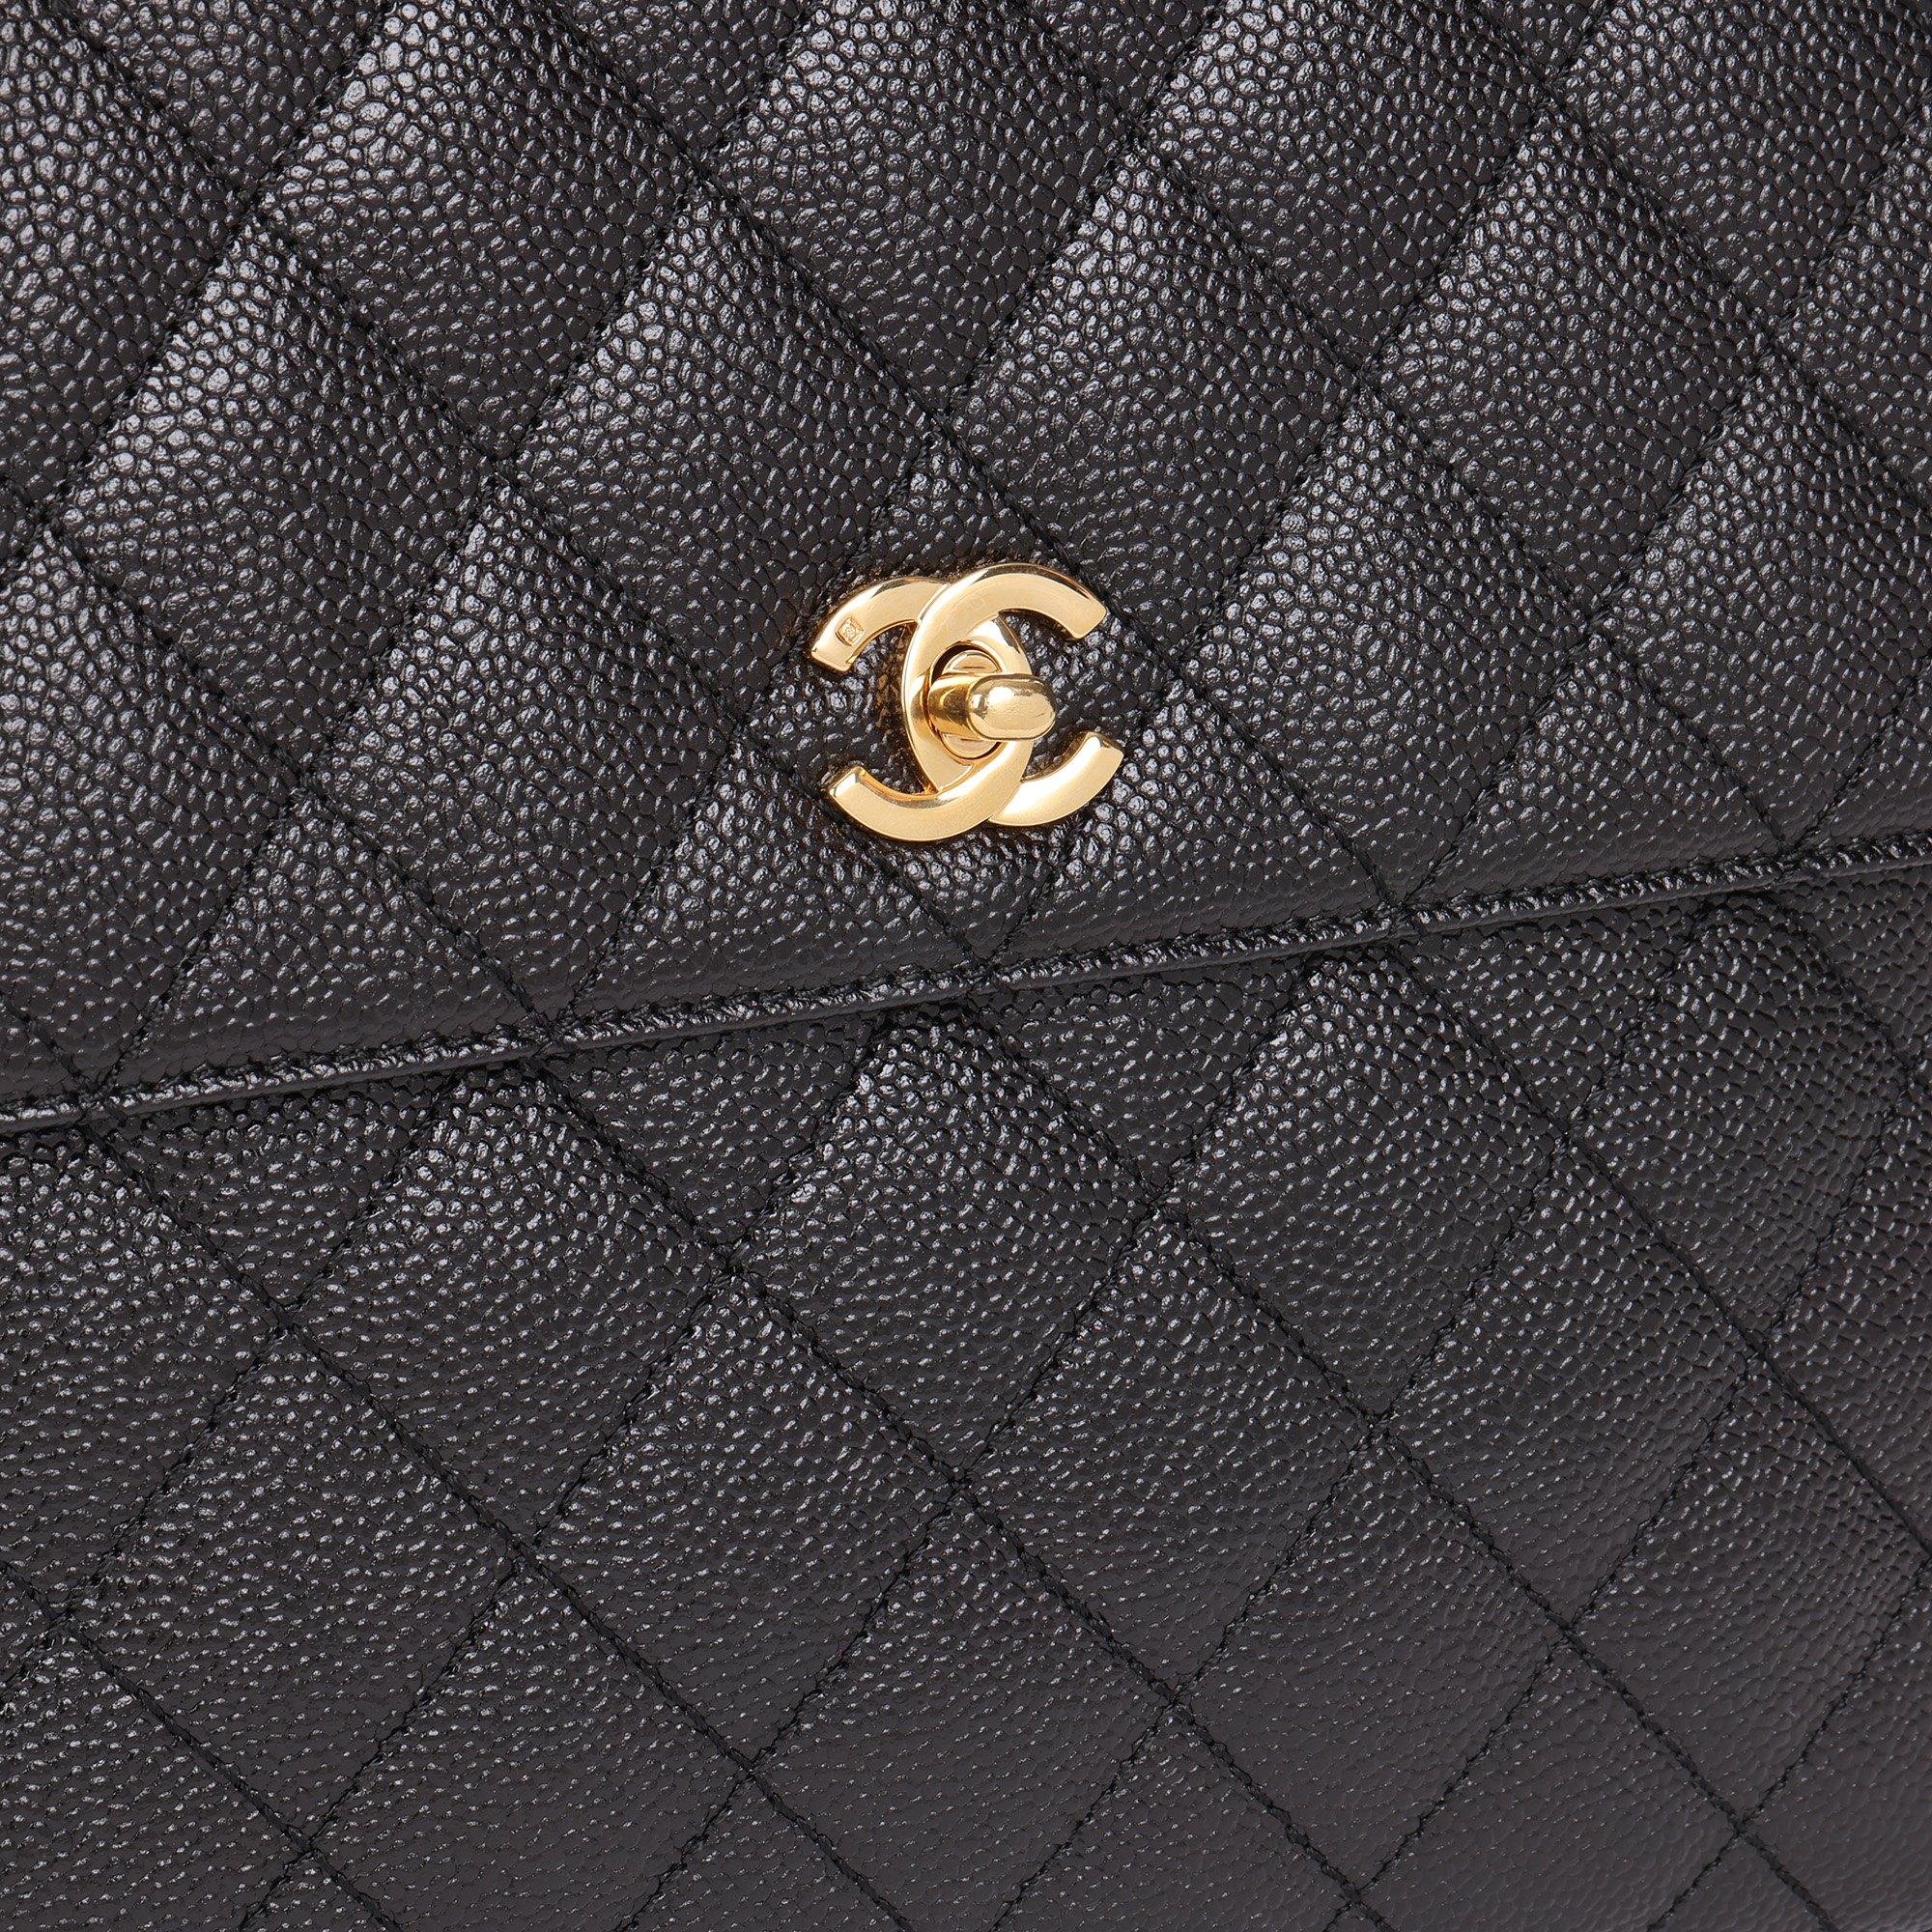 Chanel Black Quilted Caviar Leather Classic Kelly